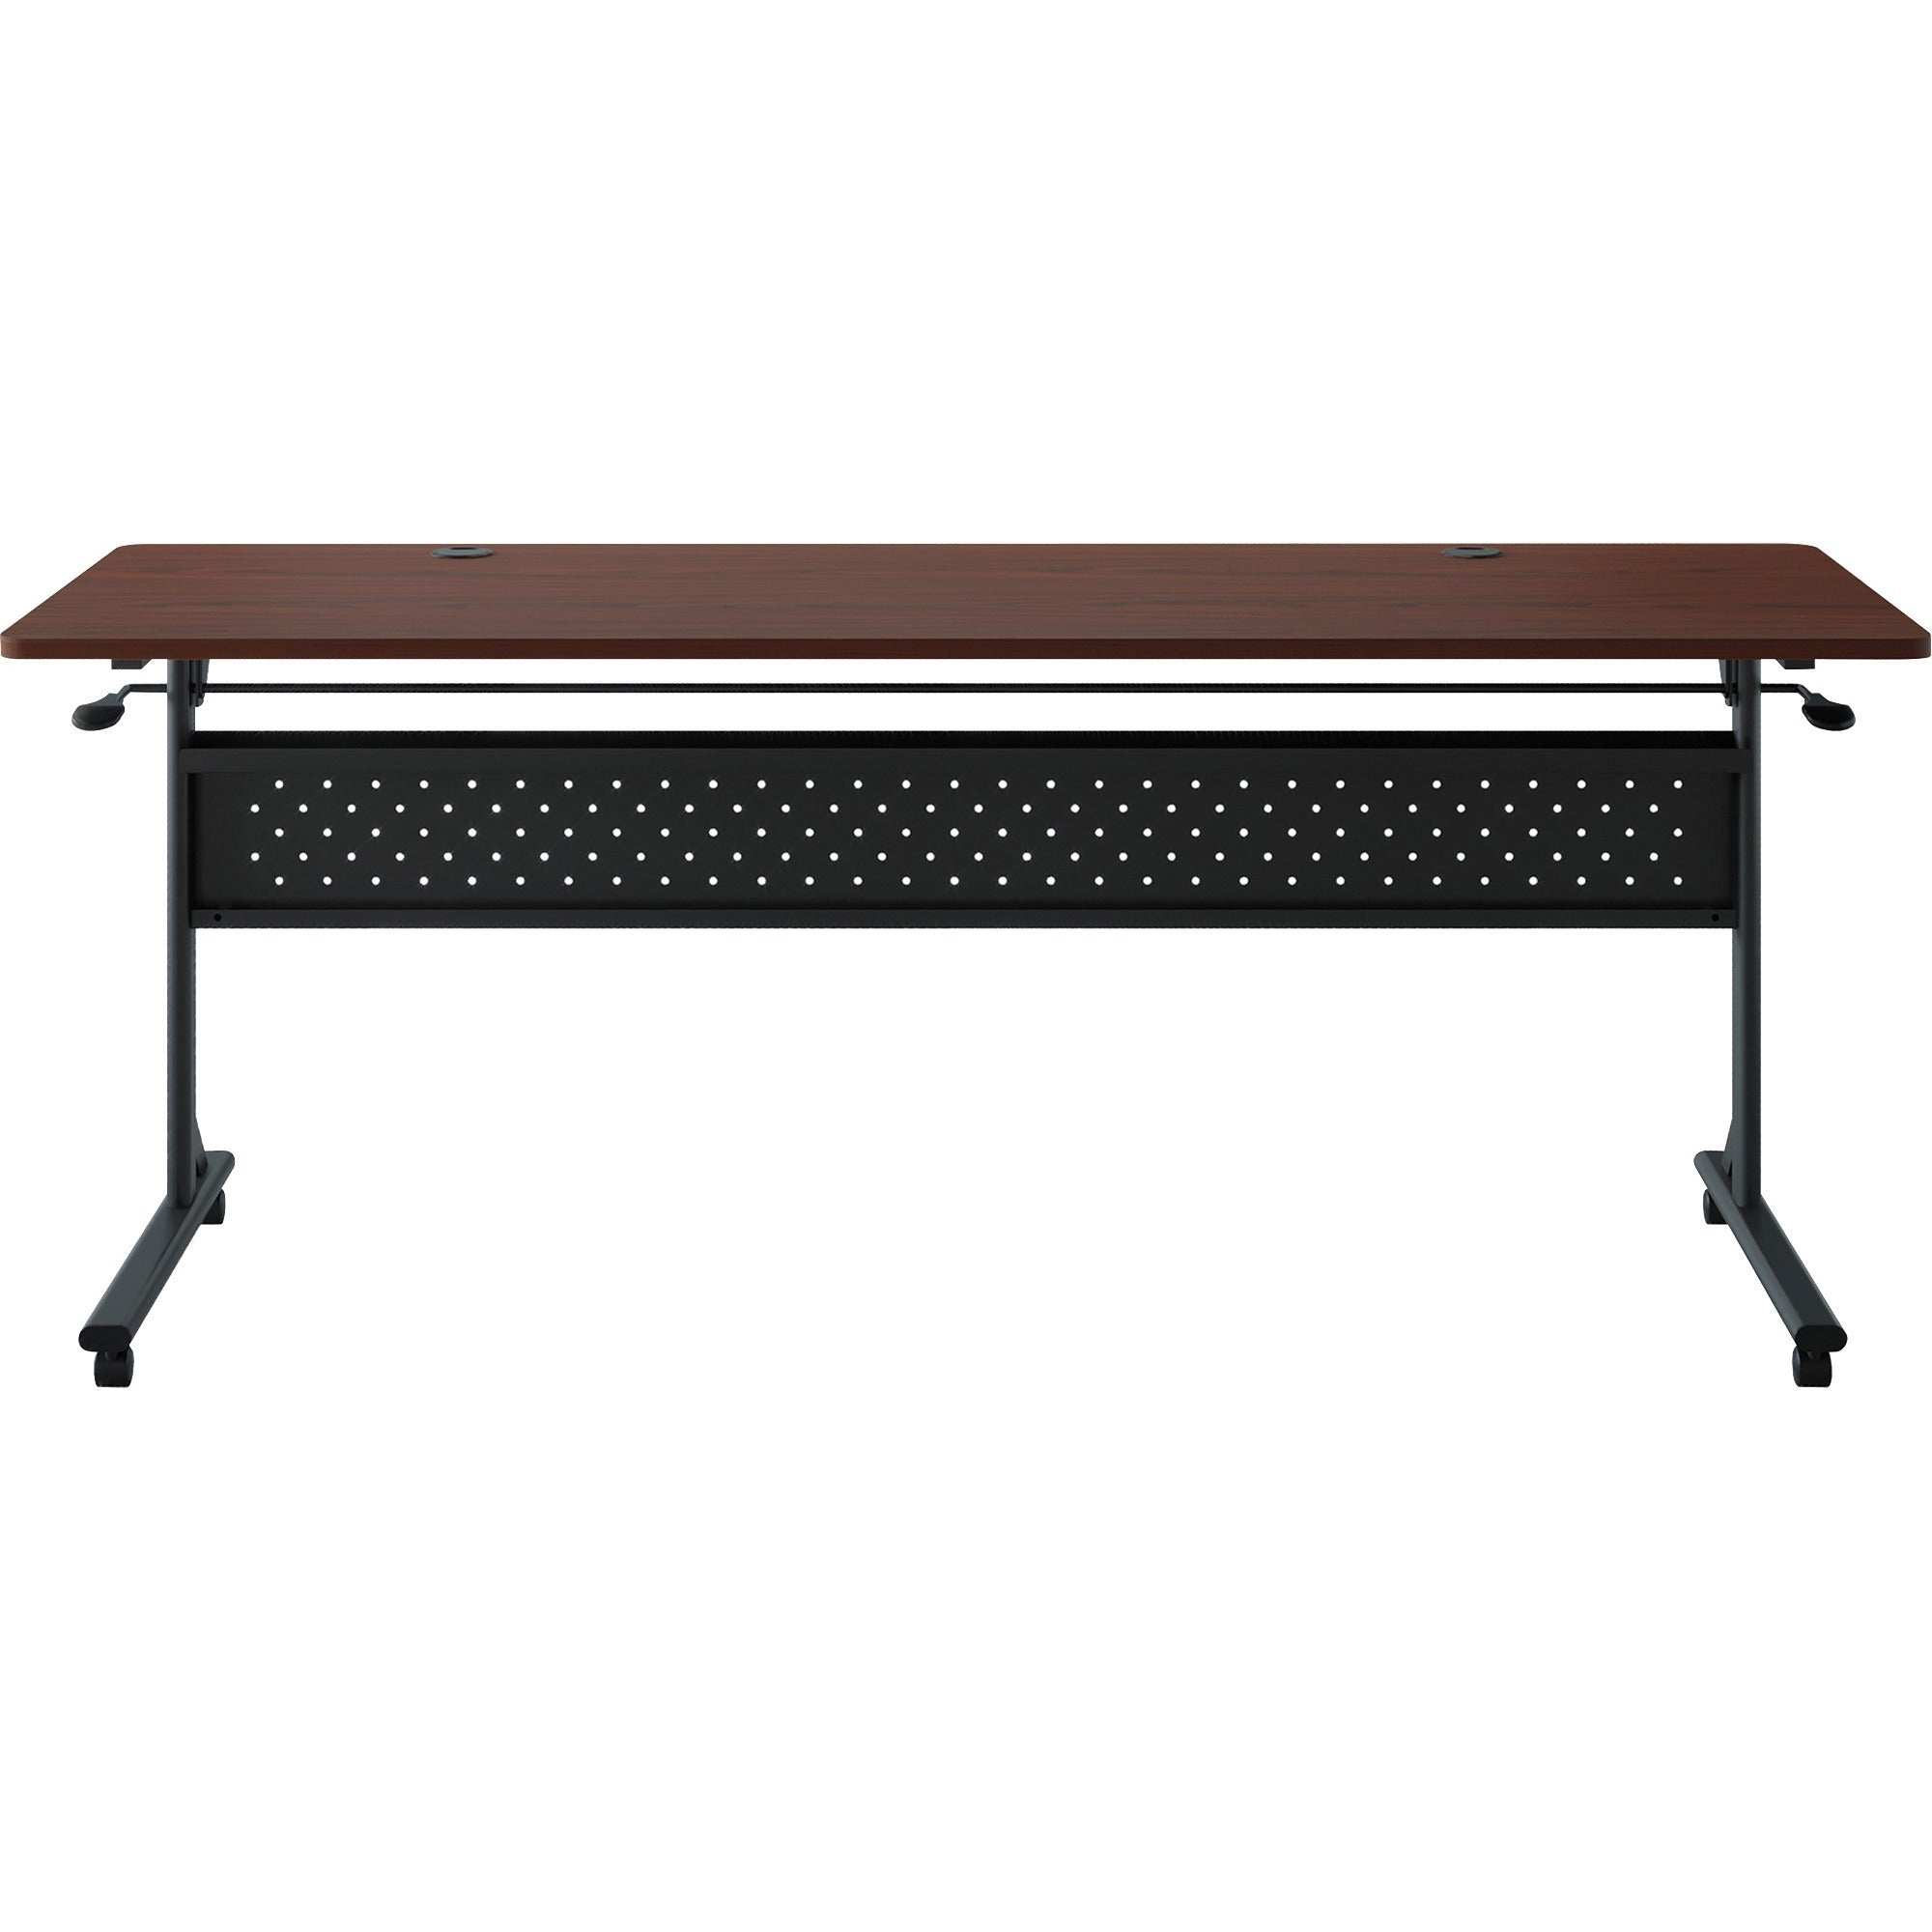 lorell-shift-20-flip-and-nesting-mobile-table-for-table-toplaminated-rectangle-top-72-table-top-length-x-24-table-top-width-x-1-table-top-thickness-2950-height-assembly-required-mahogany-1-each_llr60761 - 3